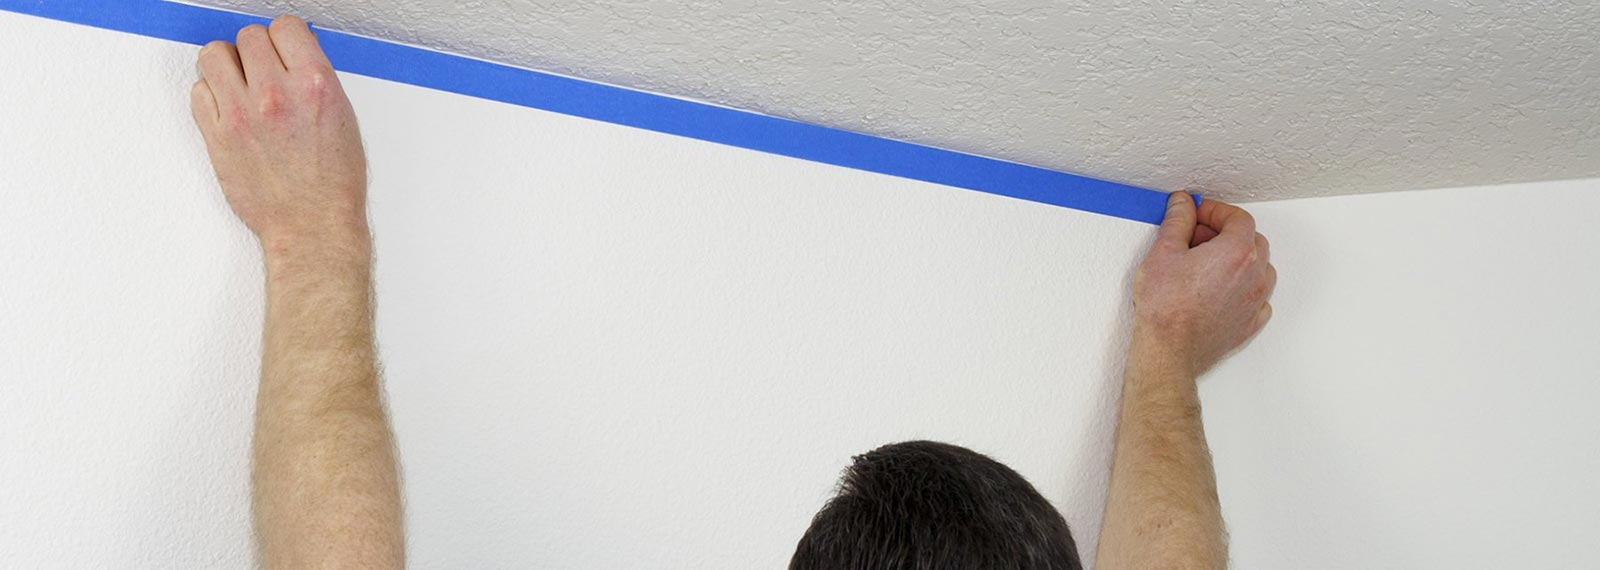 Only Using Blue Tape for Painting Projects? Wait Until You See